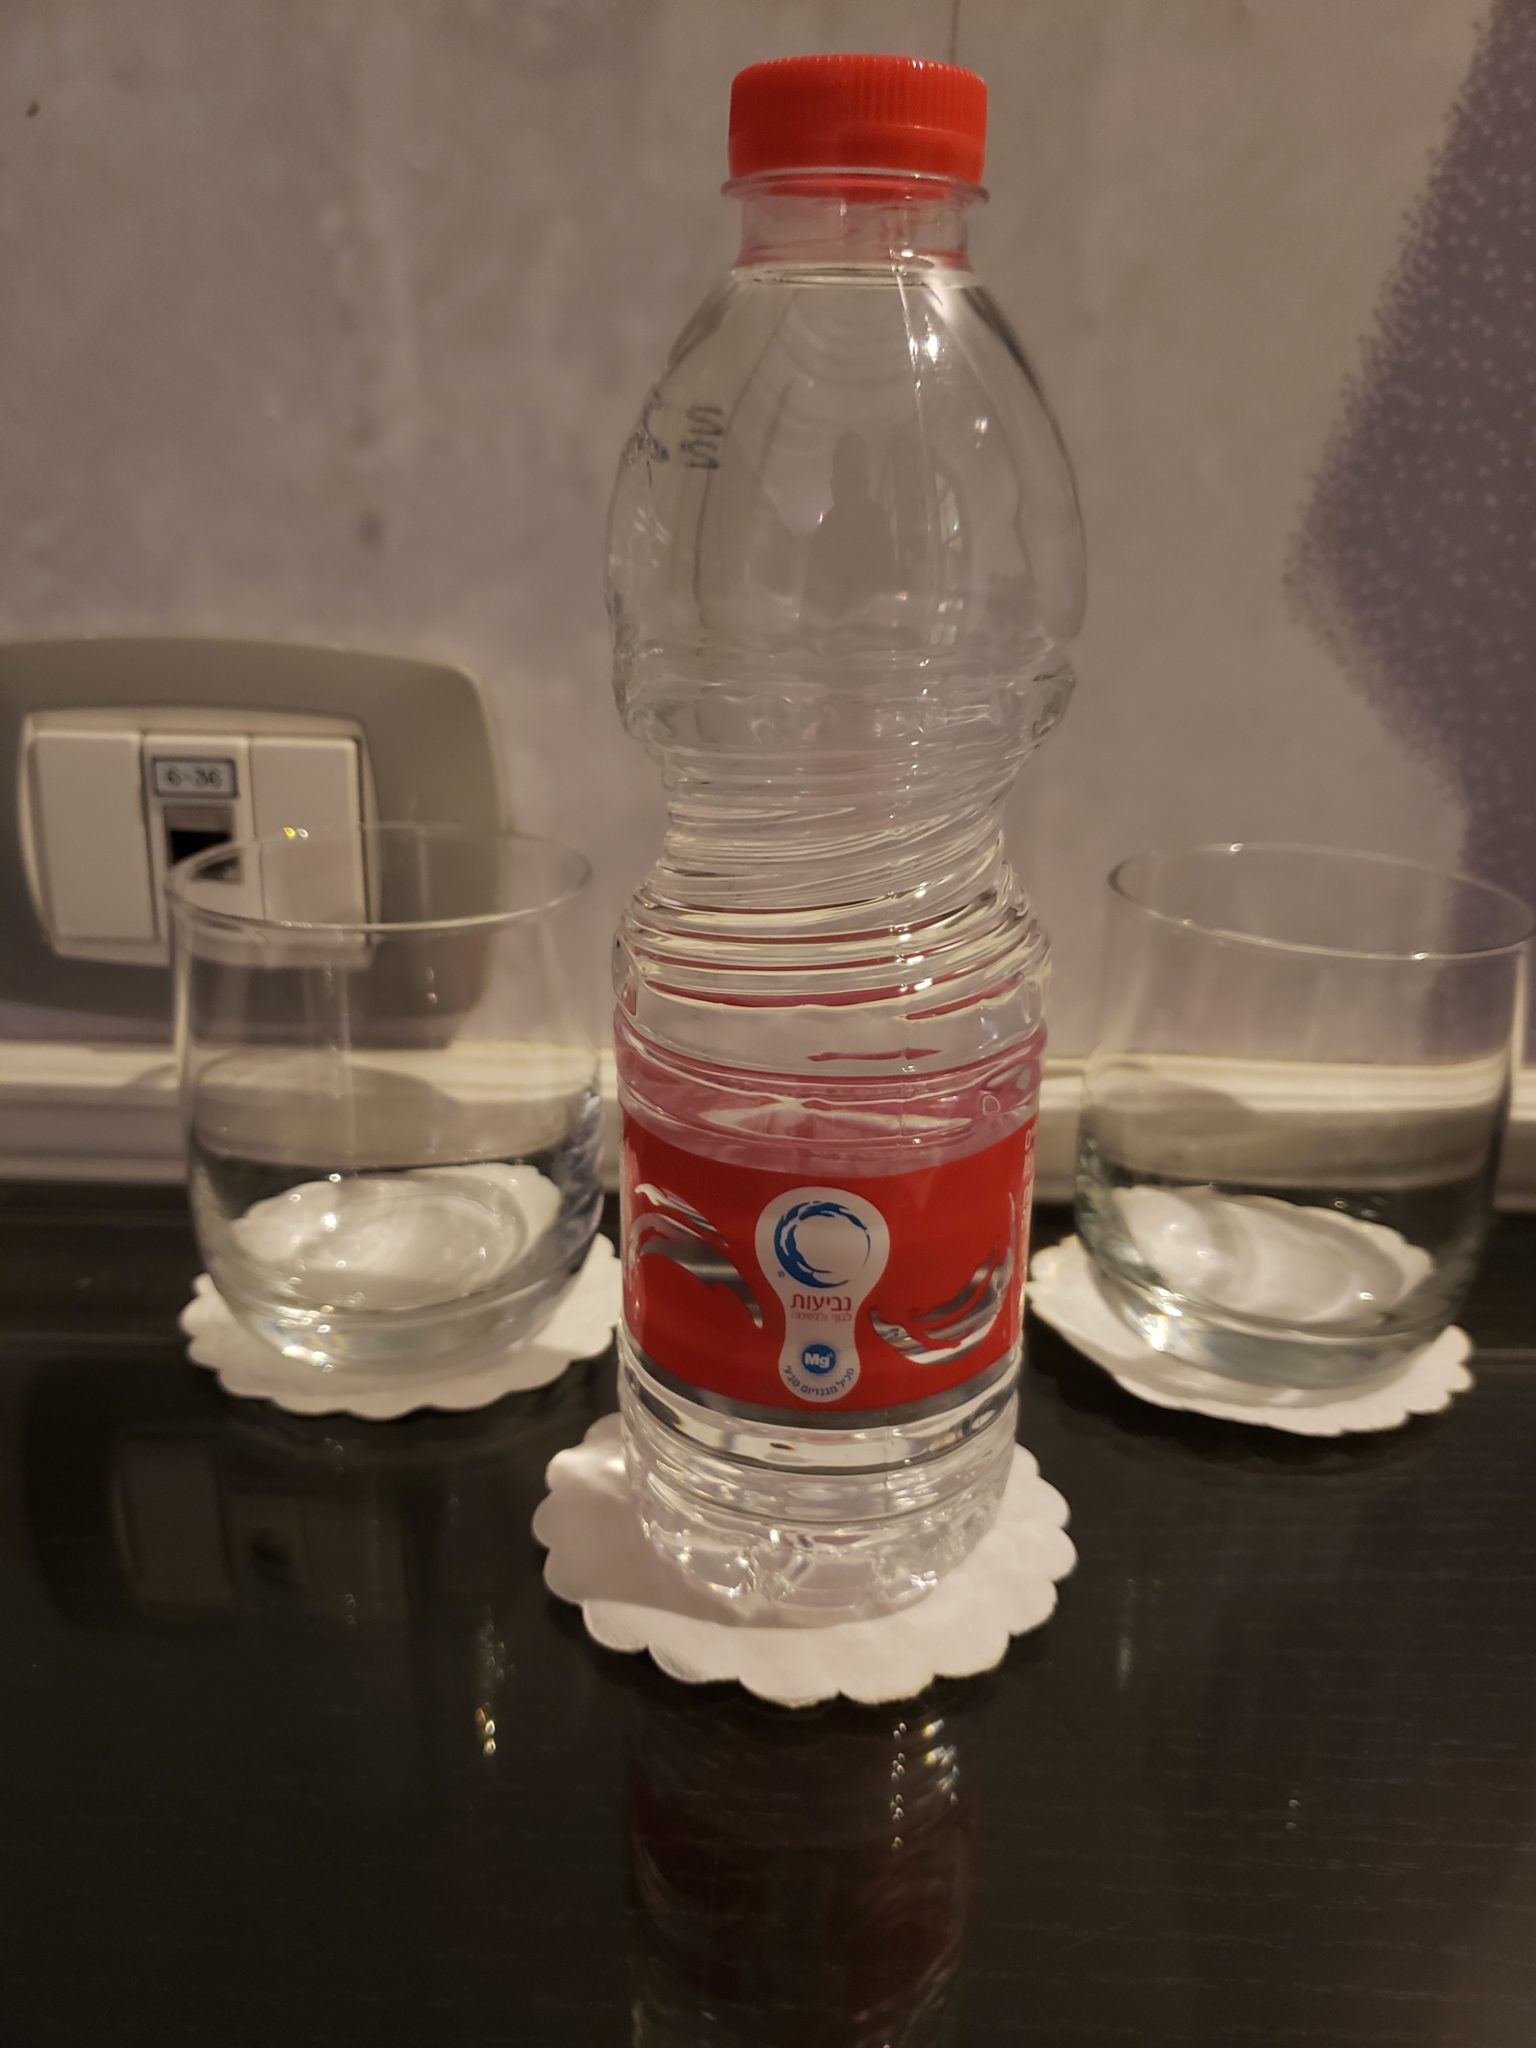 a bottle of water on a coaster